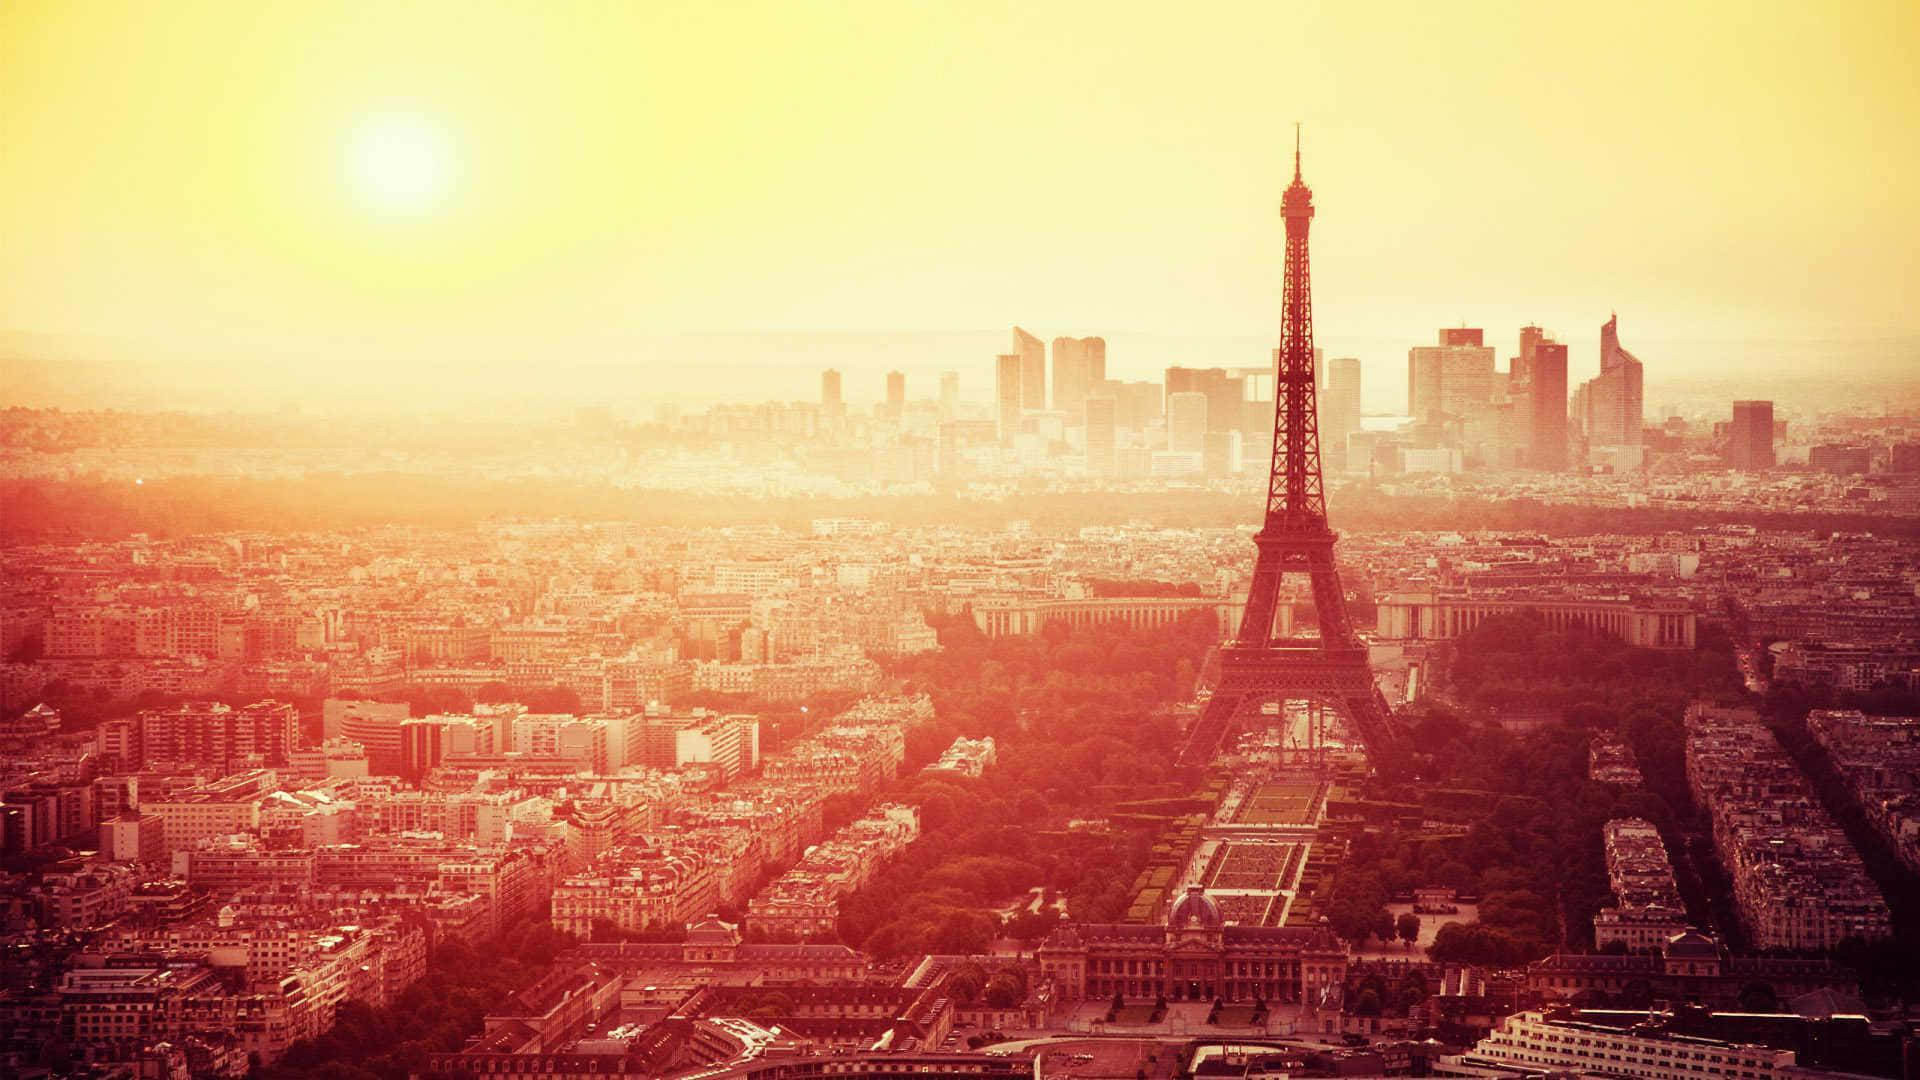 Experience the marvel of the Eiffel Tower in the heart of Paris, France.